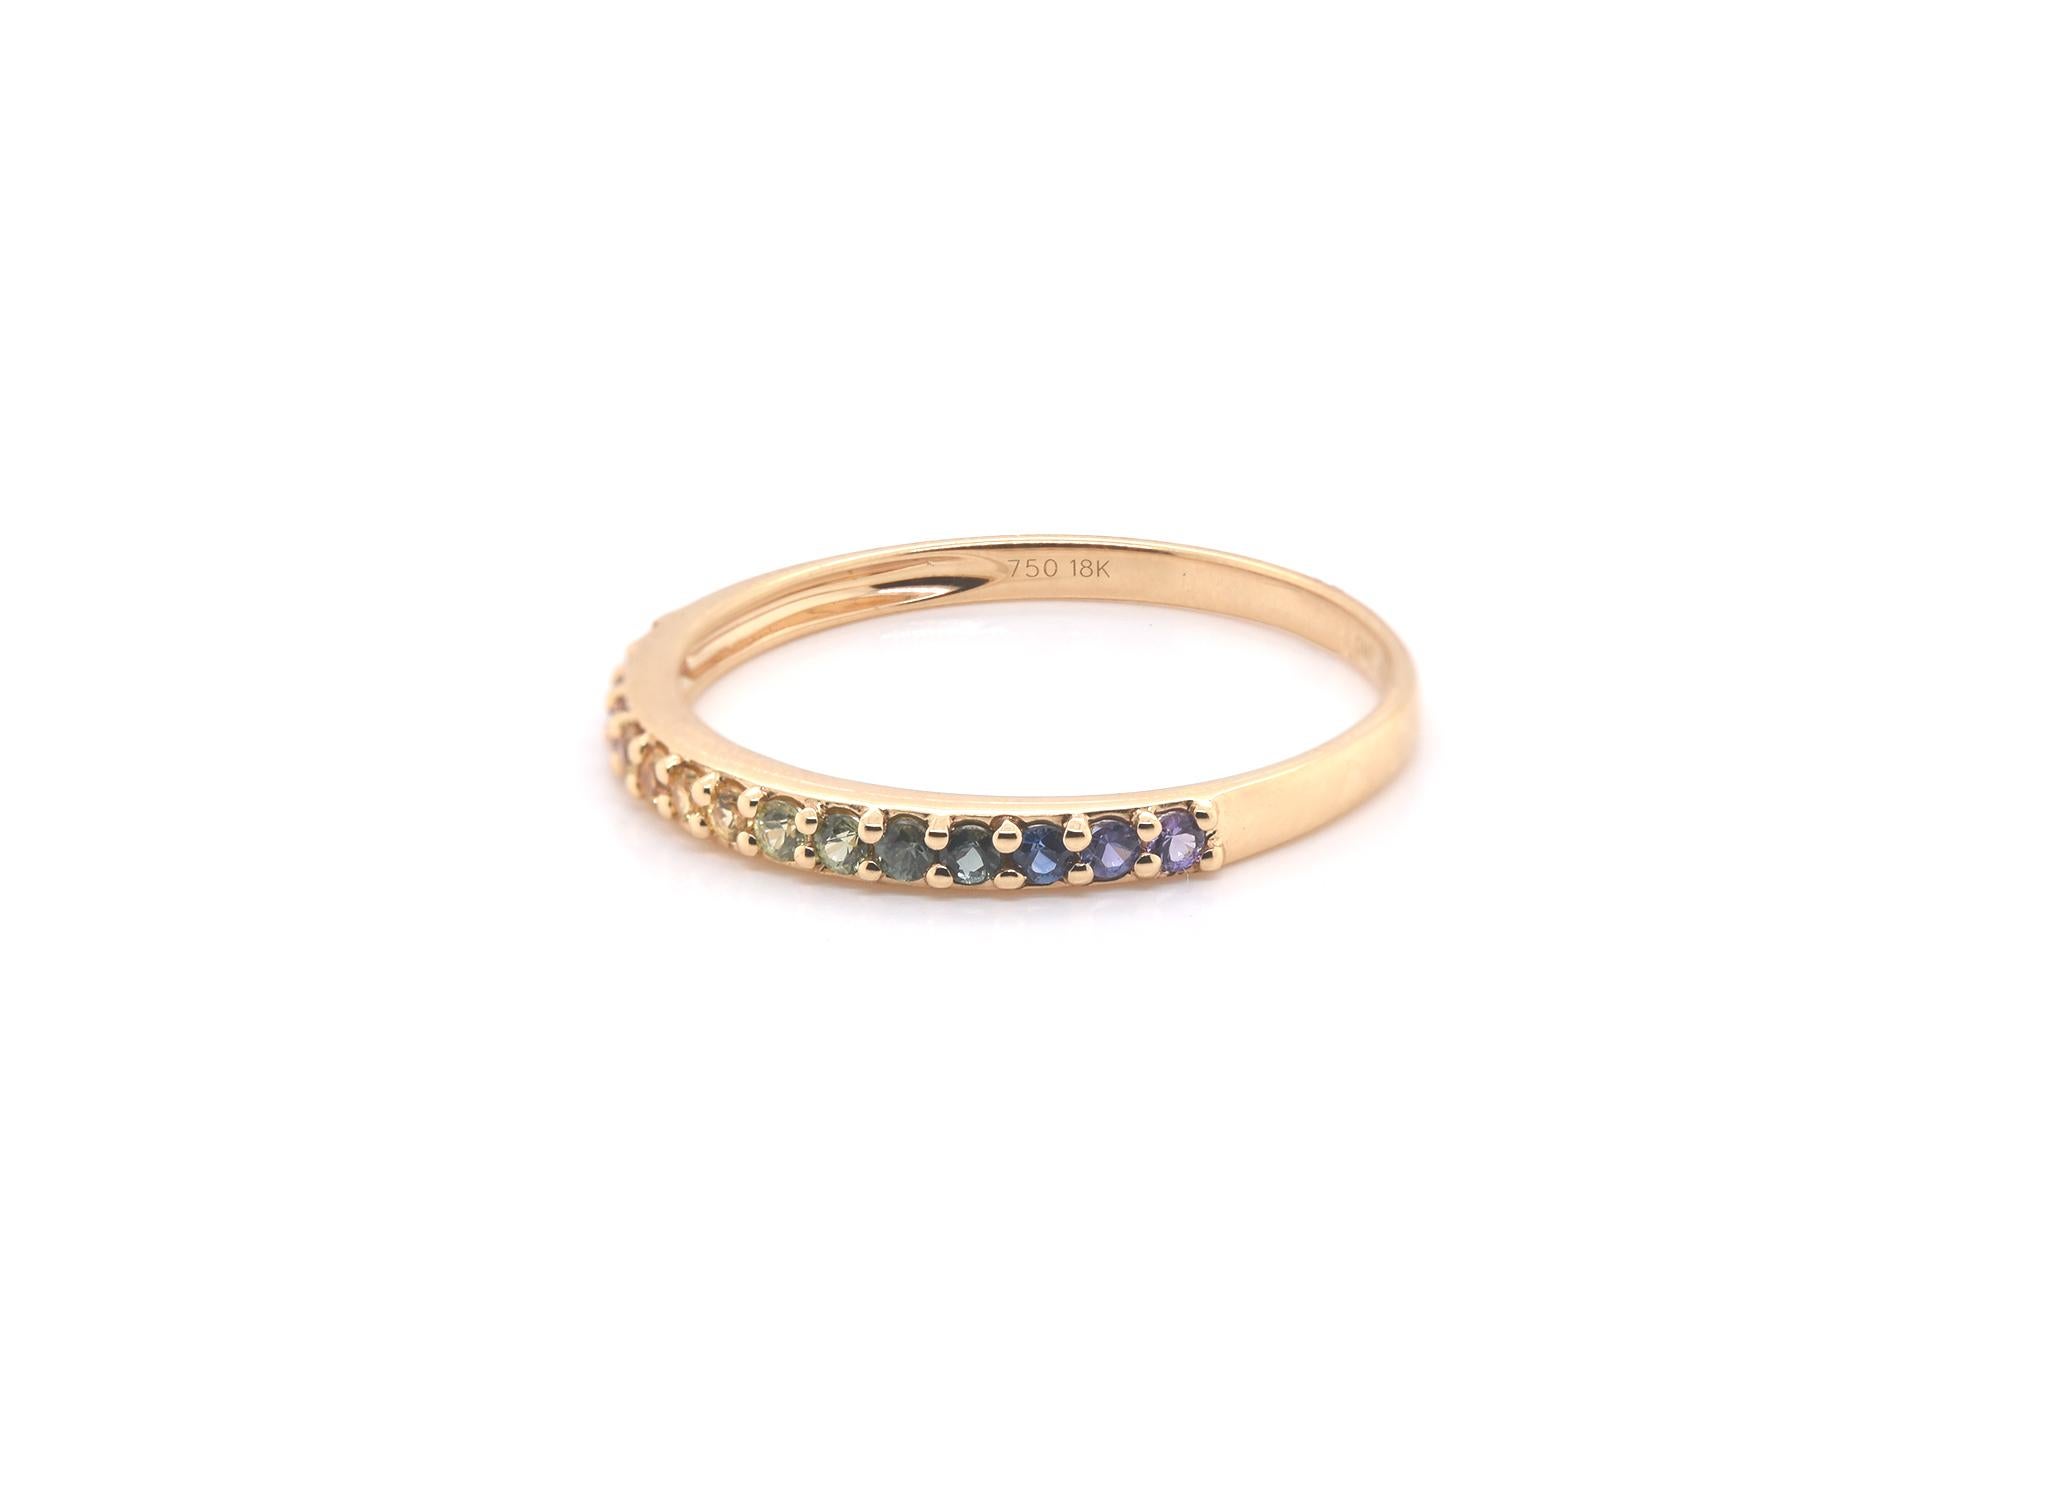 Material: 18k yellow gold
Rainbow Sapphires: 15 Round cut = .28 cttw 
Ring Size: 8 (allow up to two additional business days for sizing requests)
Weight: 1.63 grams
